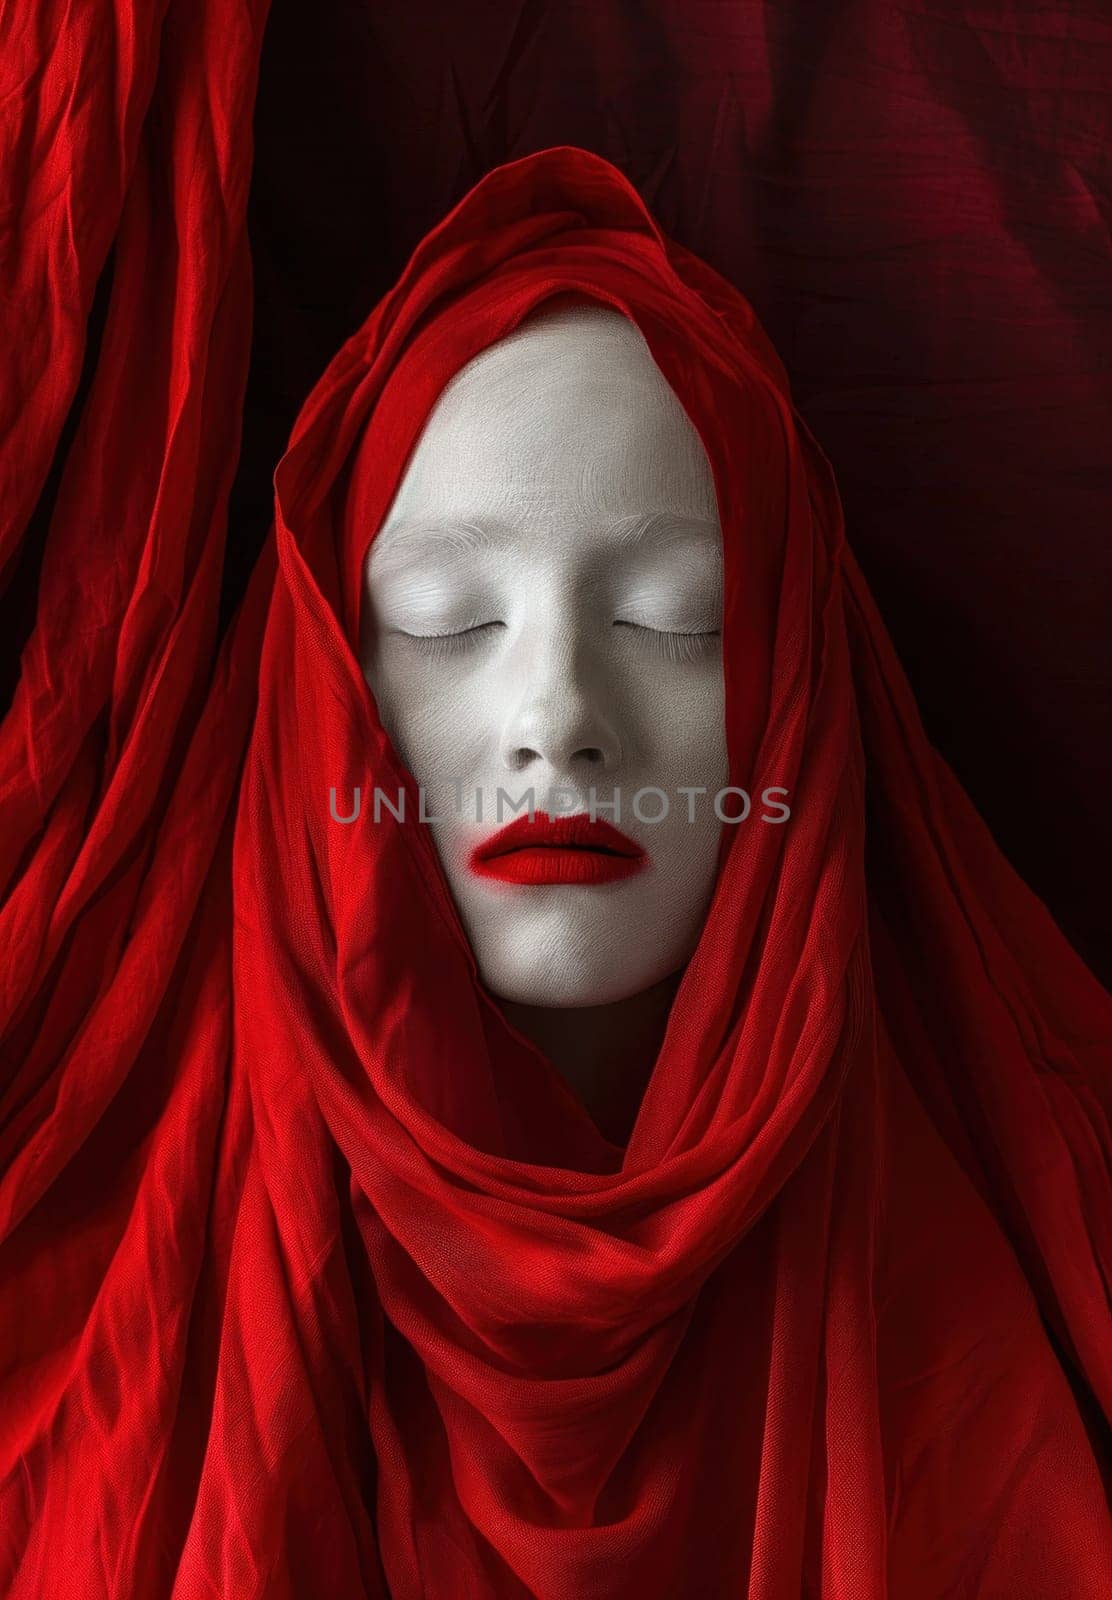 Beauty concept woman with red scarf and white makeup laying on cloth in artistic fashion pose